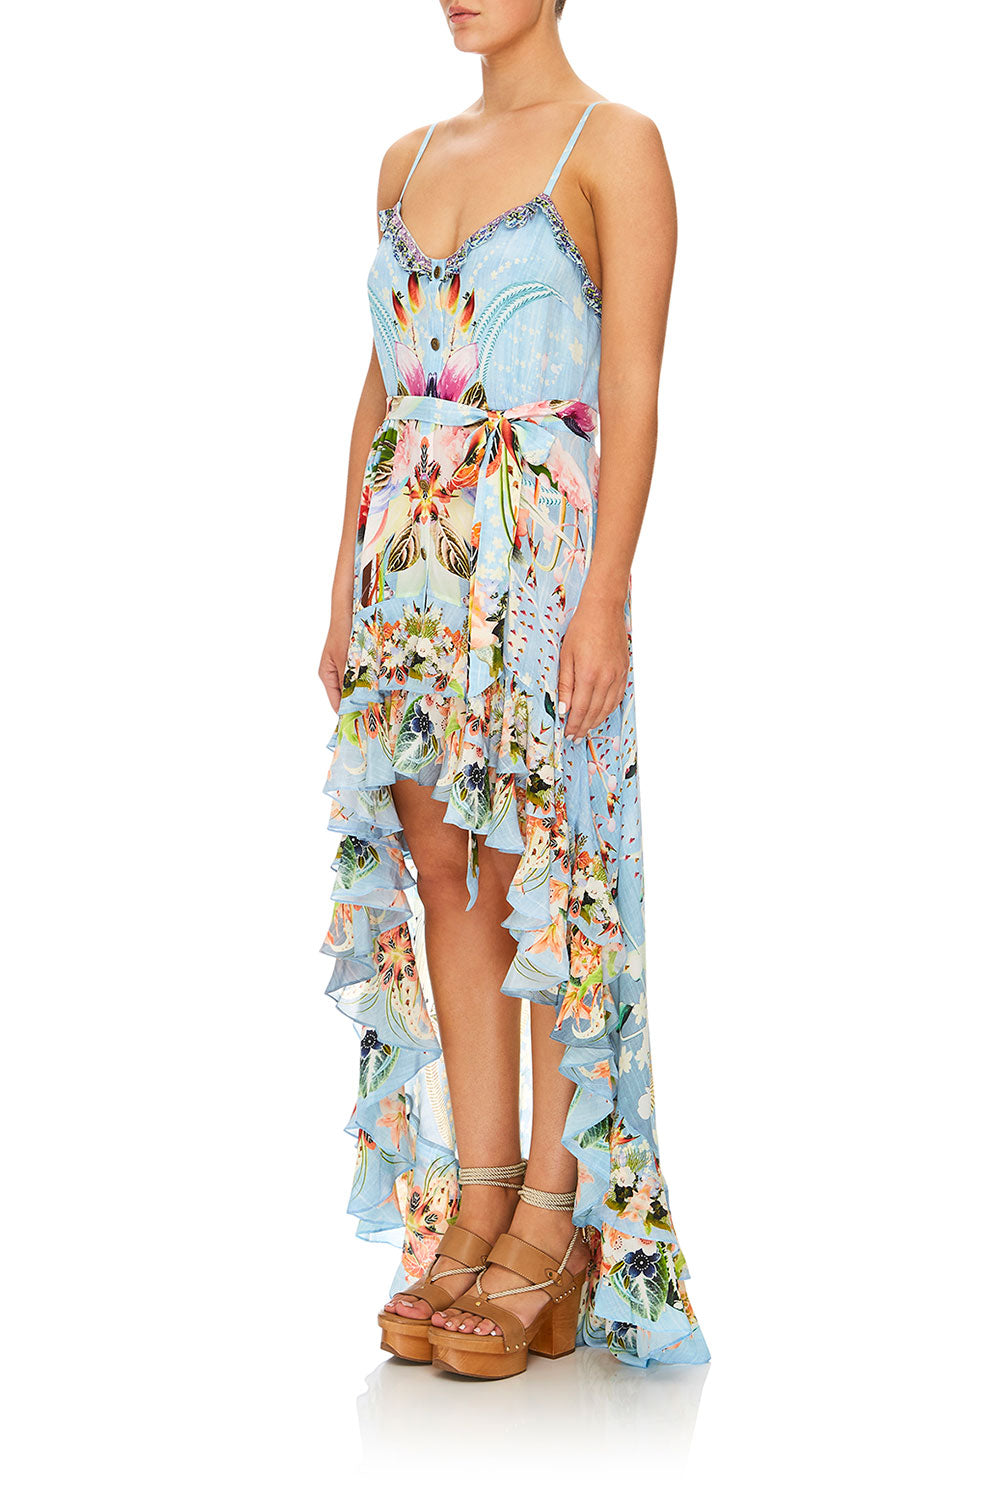 CAMILLA THE STILL ABYSS HIGH LOW BUTTON DOWN DRESS